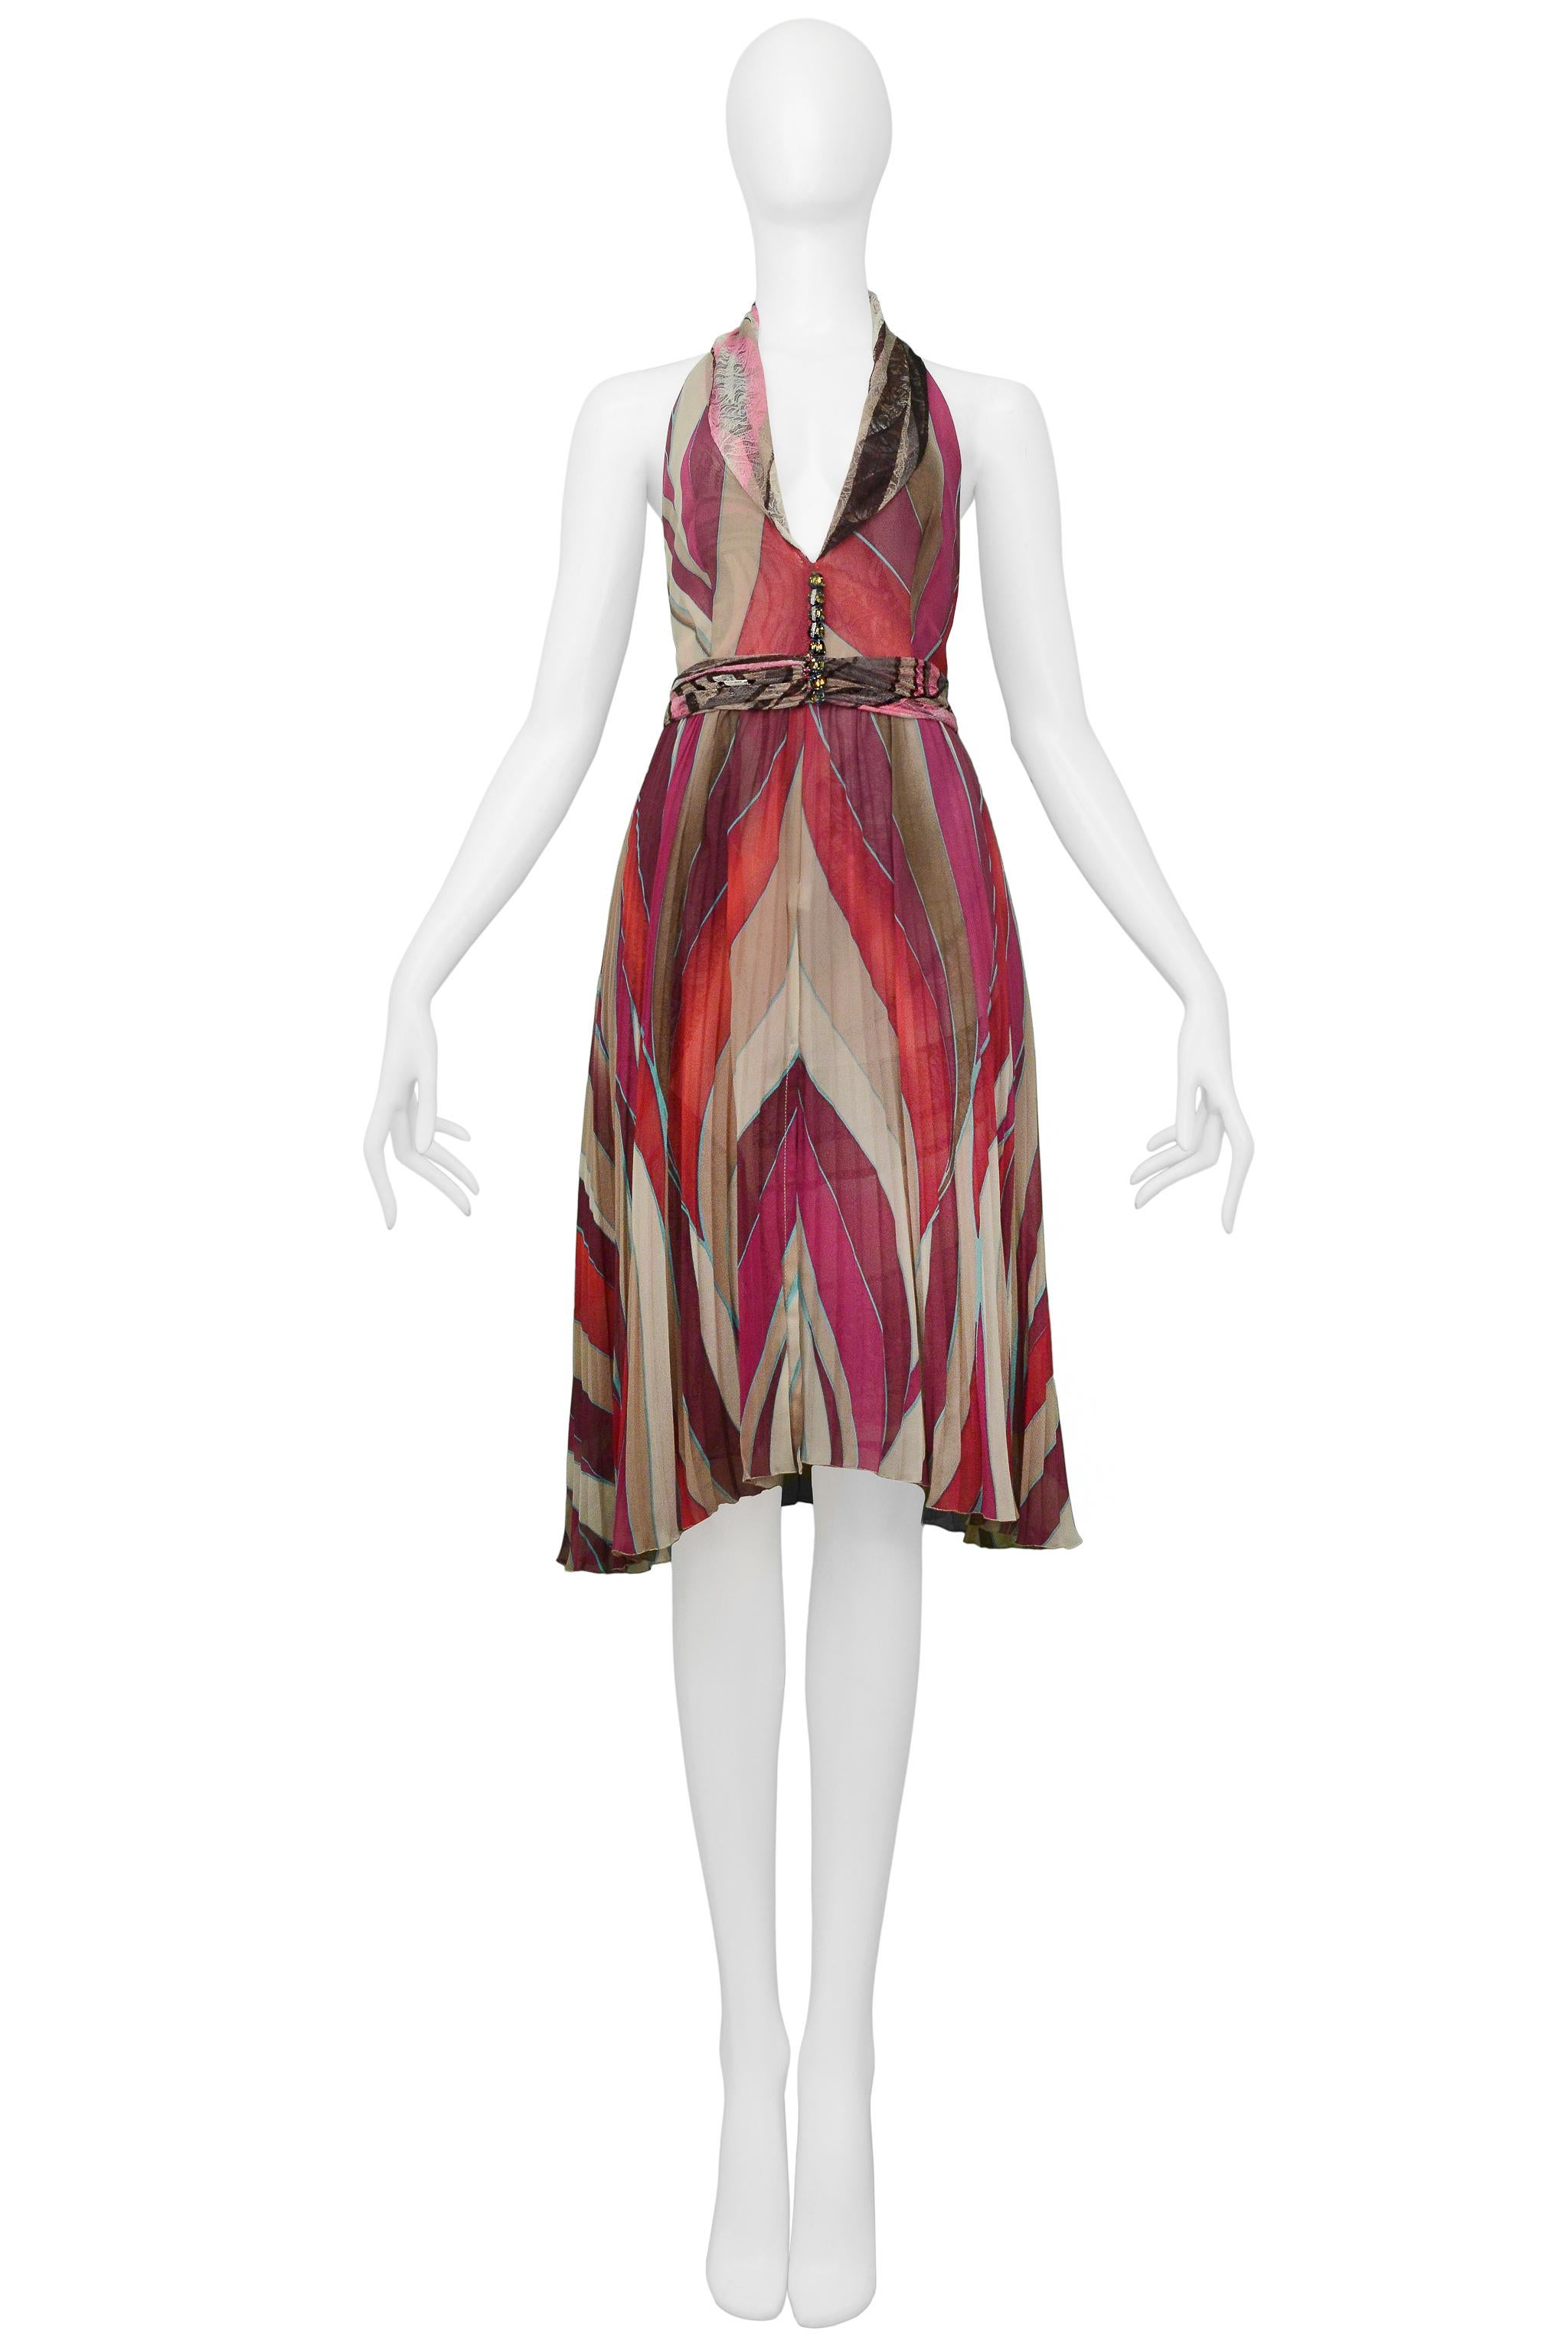 Resurrection Vintage is excited to offer a vintage Versace pink, red, and brown halter dress featuring a halter neck with lace shawl collar, plunging neckline, jewel buttons, attached lace belt with jewel button, and printed lace underskirt.